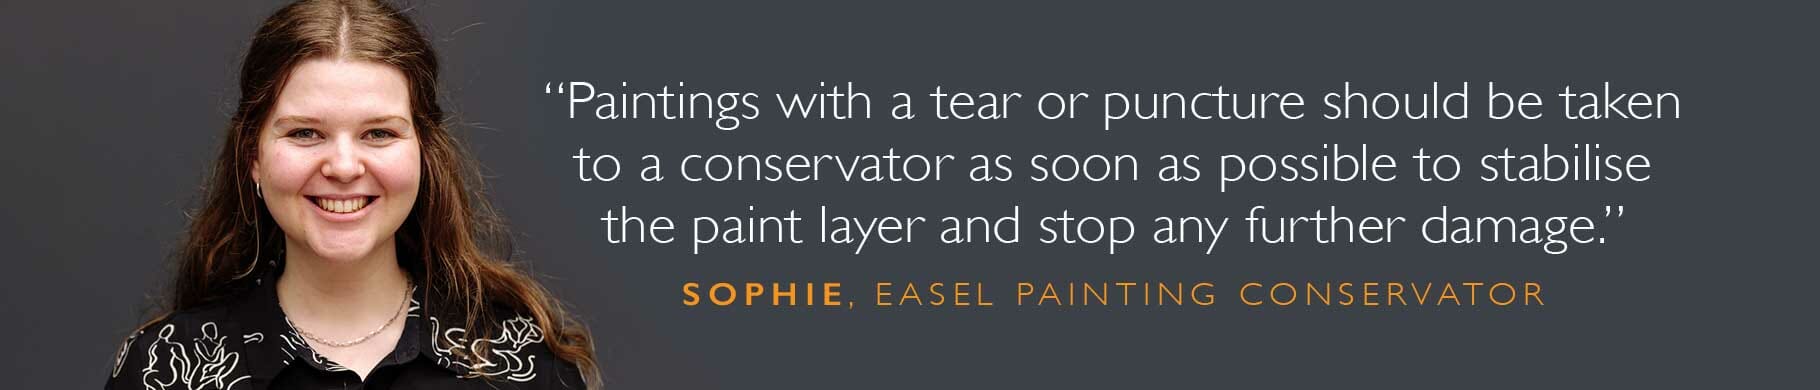 sophie quote about torn and punctured paintings